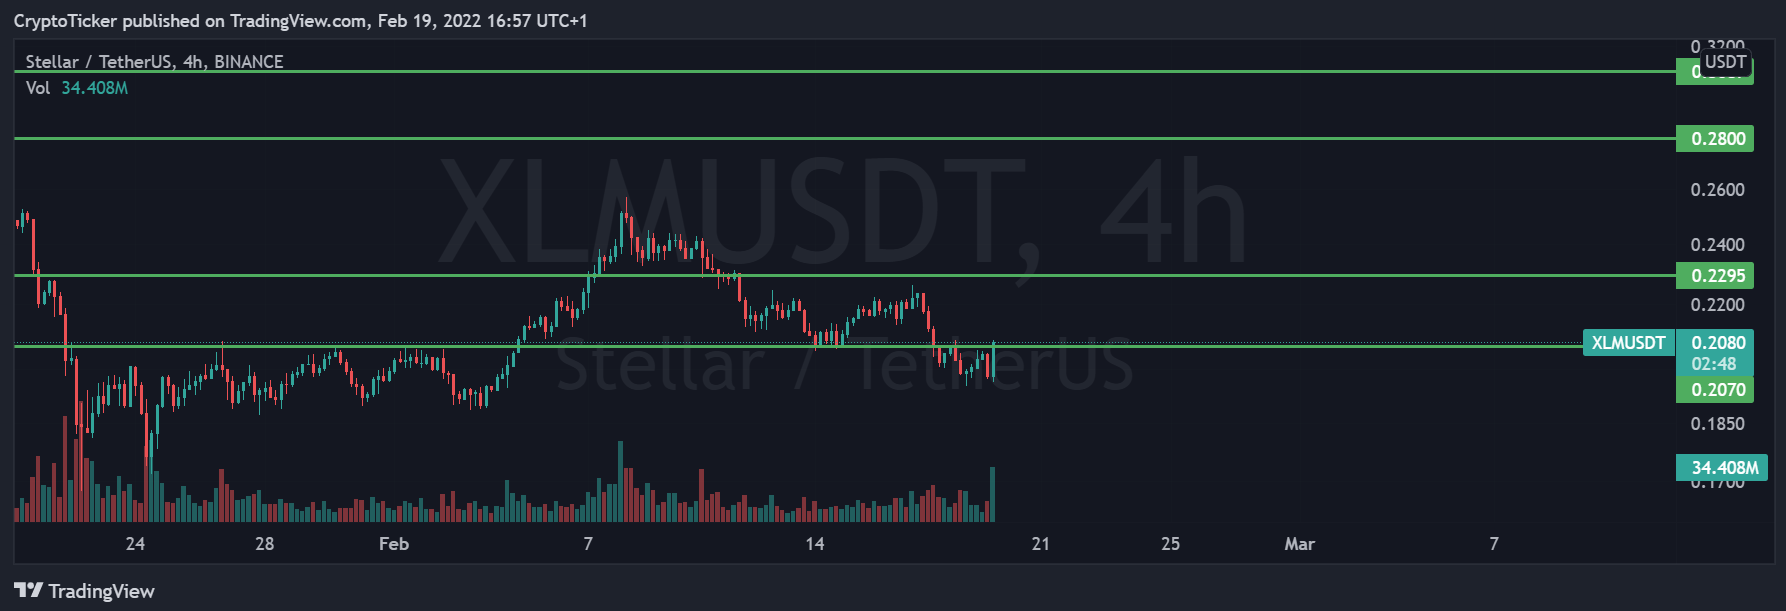 XLM/USDT 4-hours chart showing the resistance break of XLM price resistance